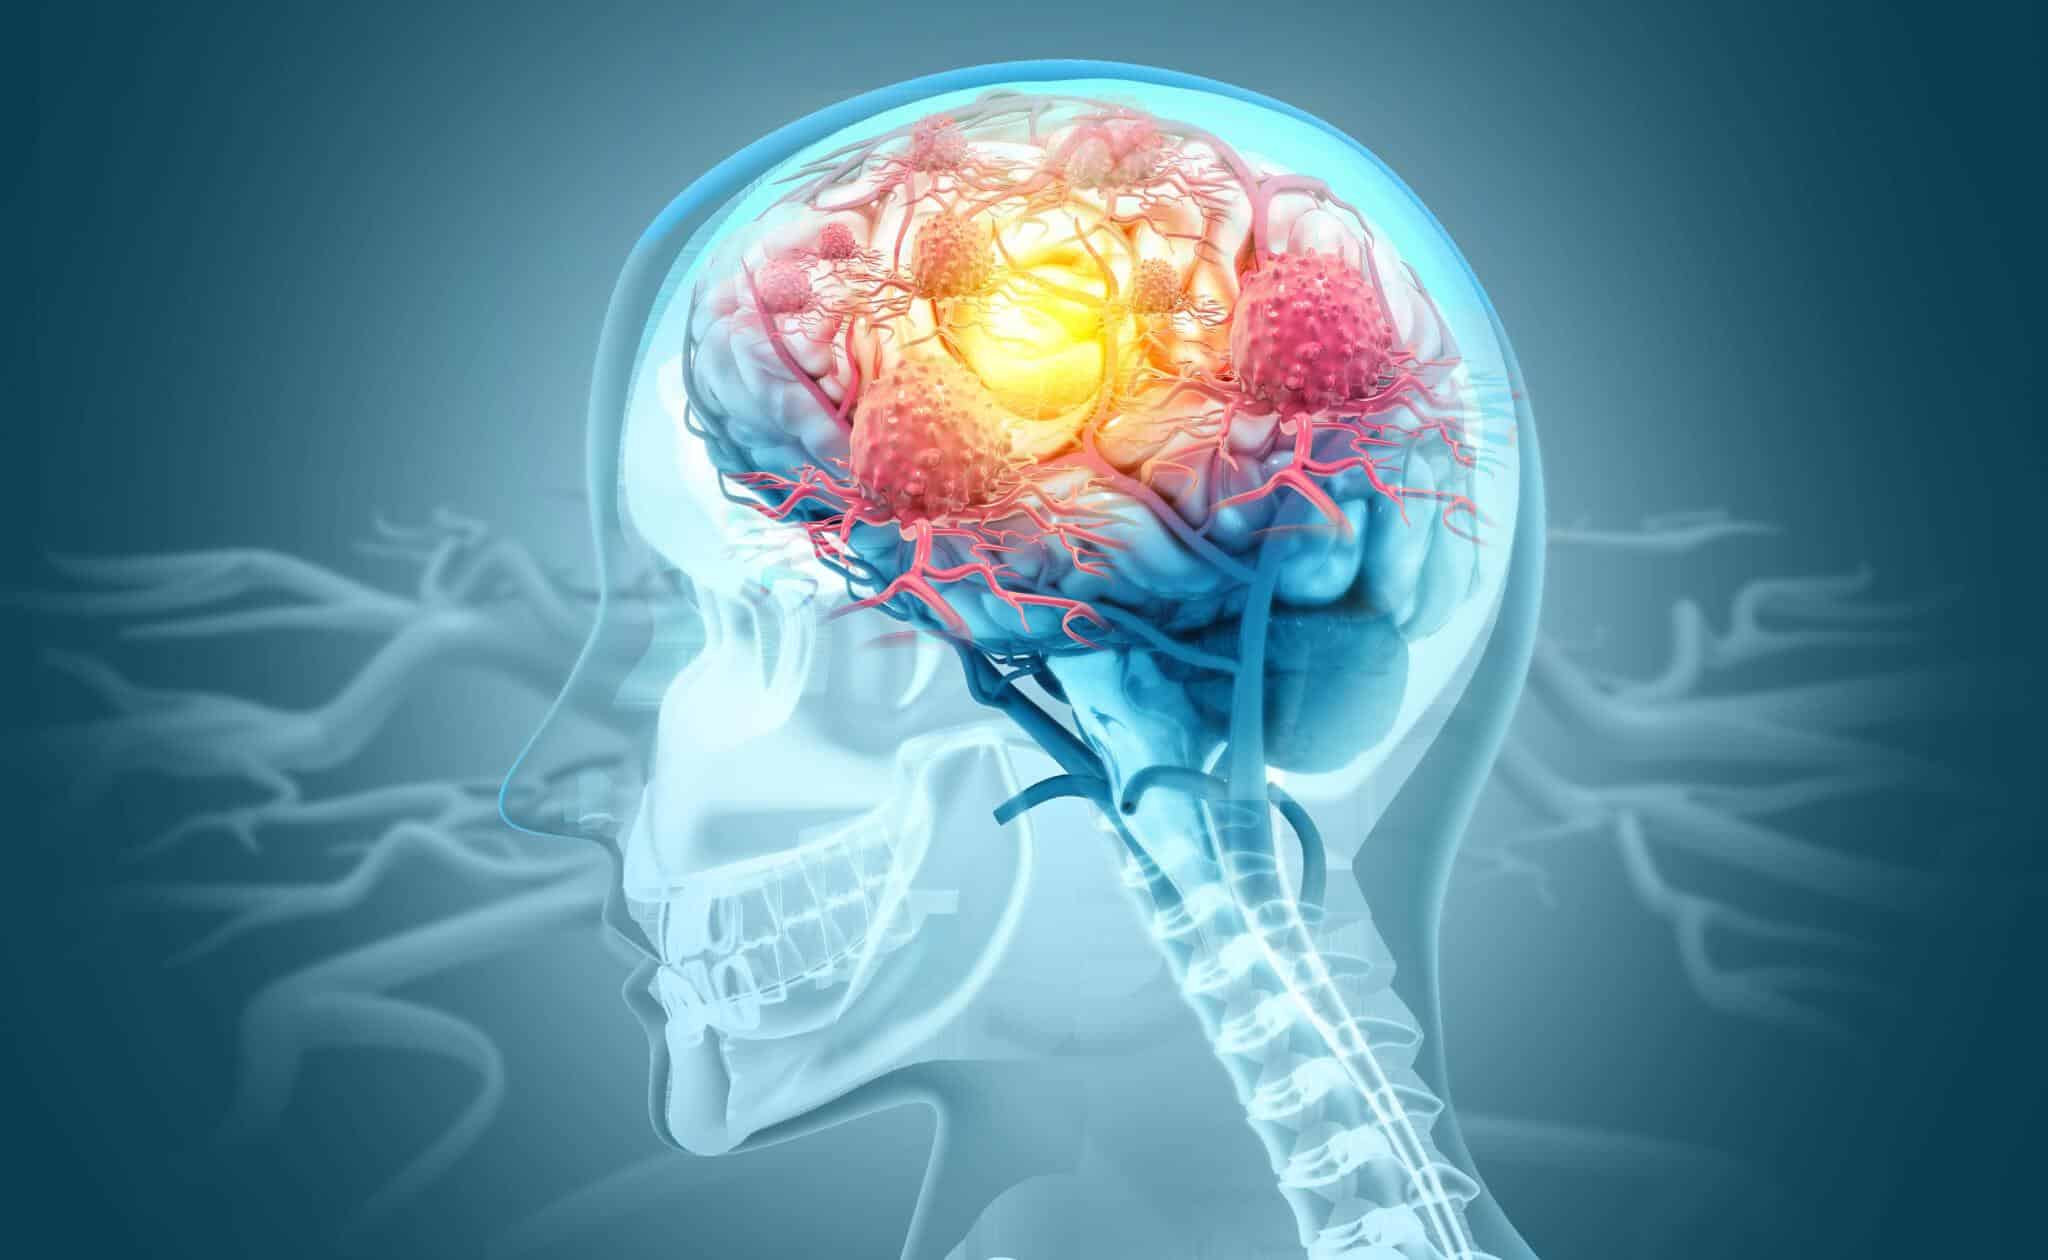 Is Stem Cell Therapy A Cure For Neurodegenerative Diseases?